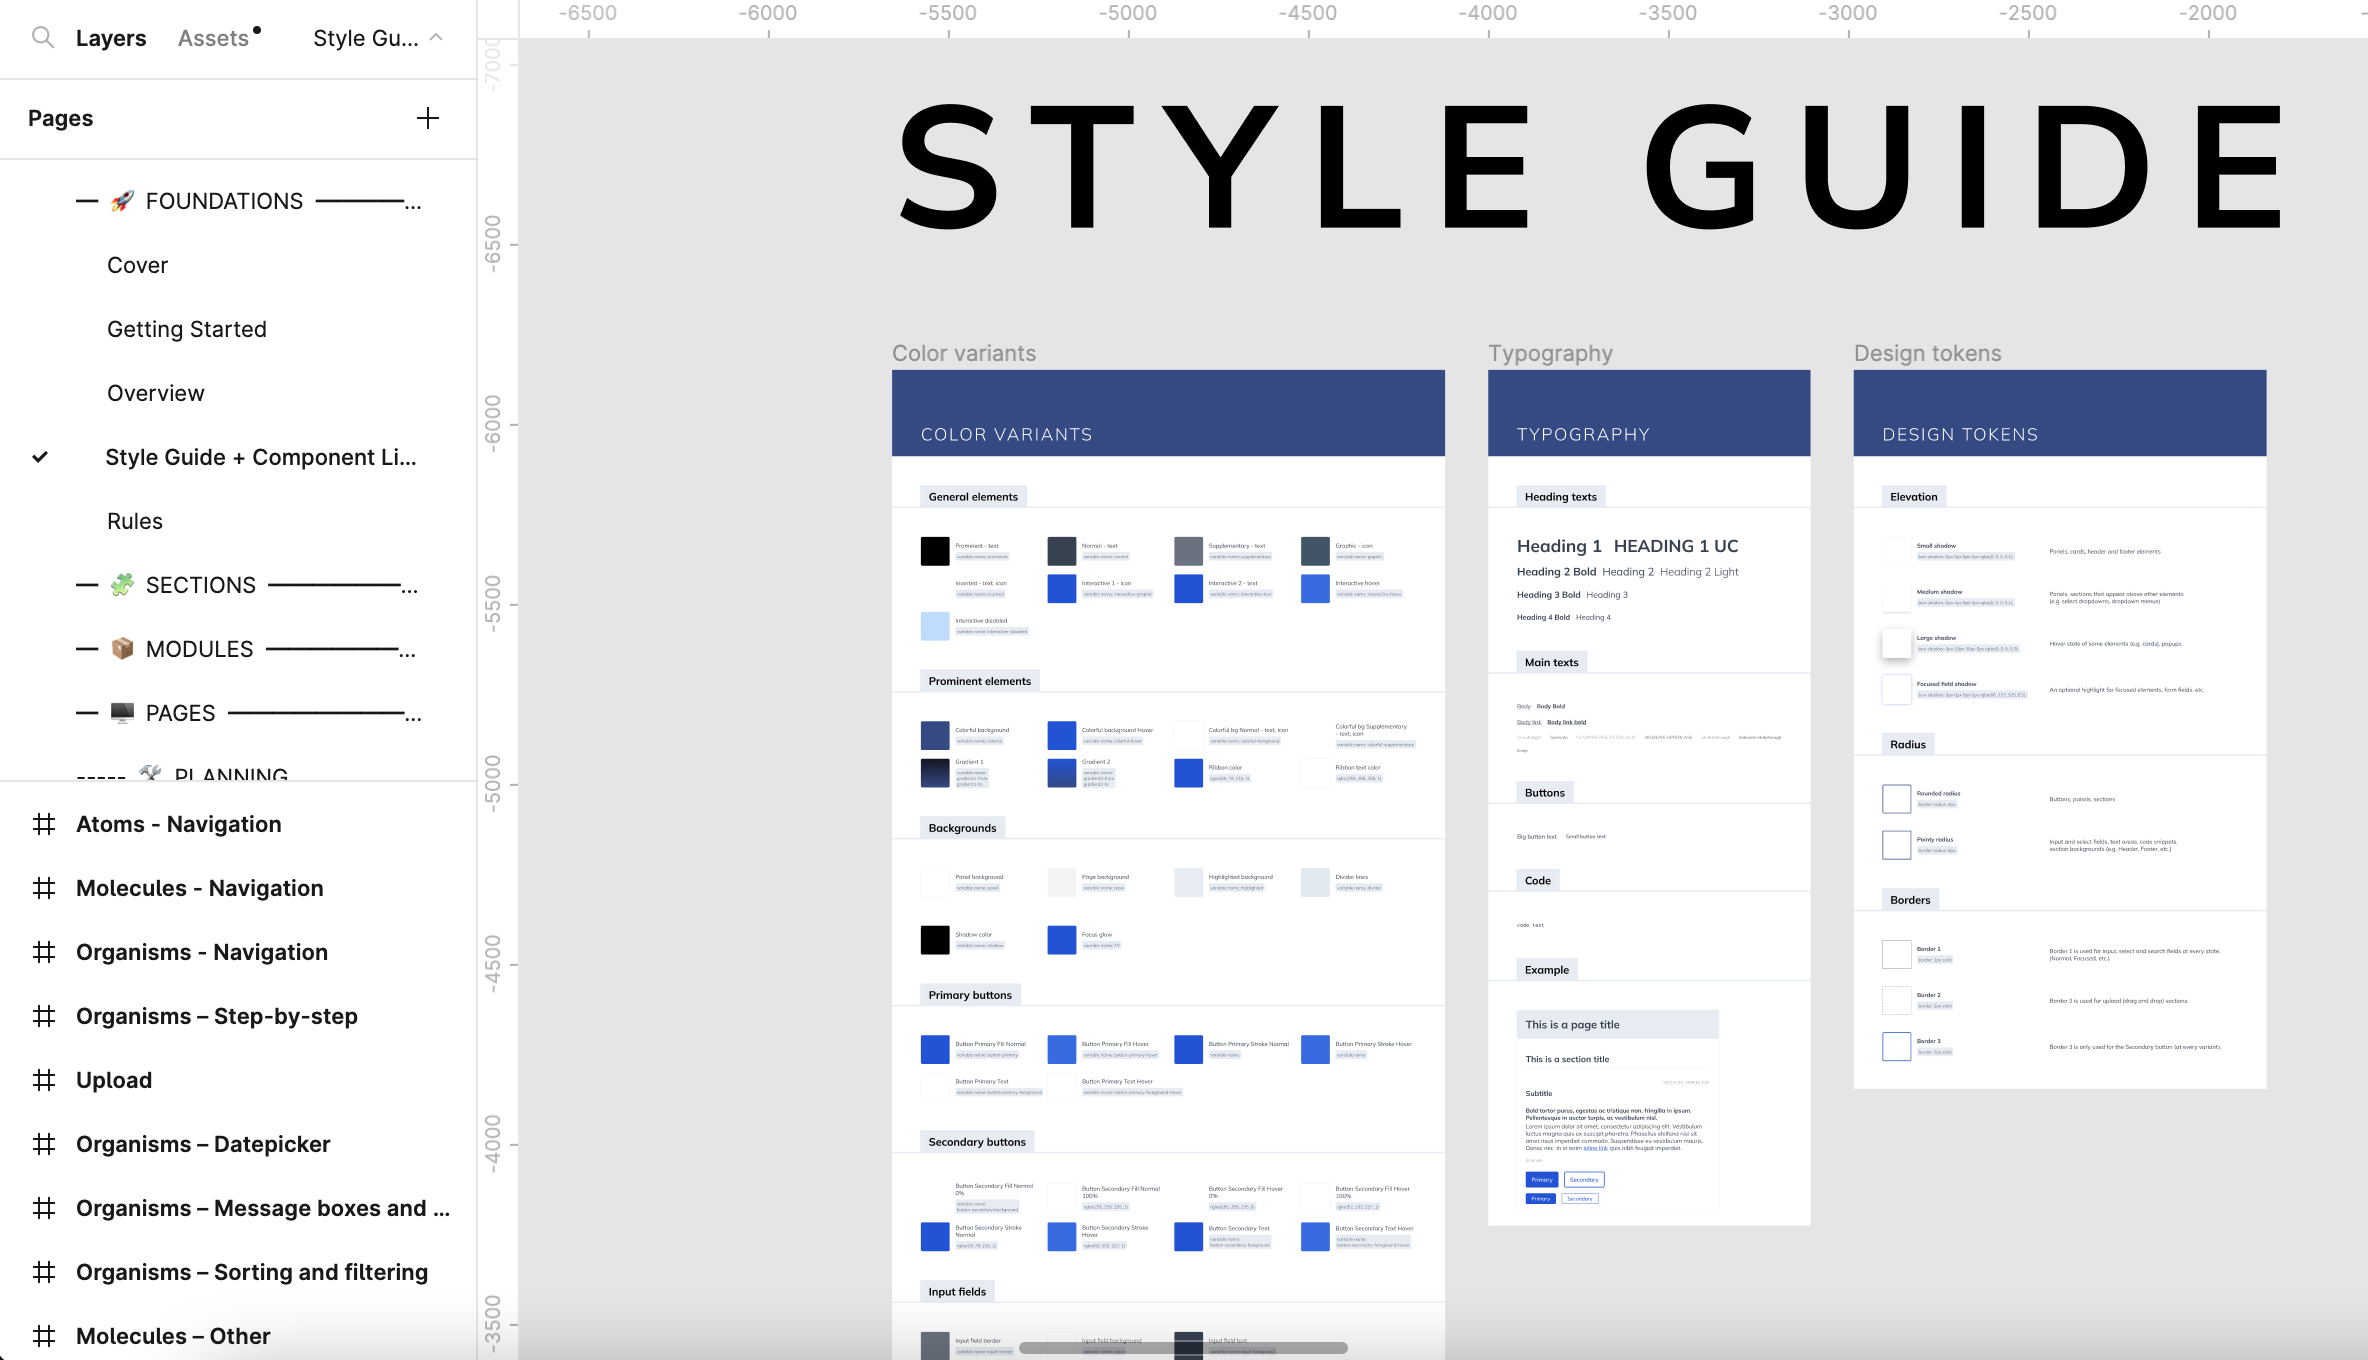 The view of the Style Guide in the Style Guide+Components page